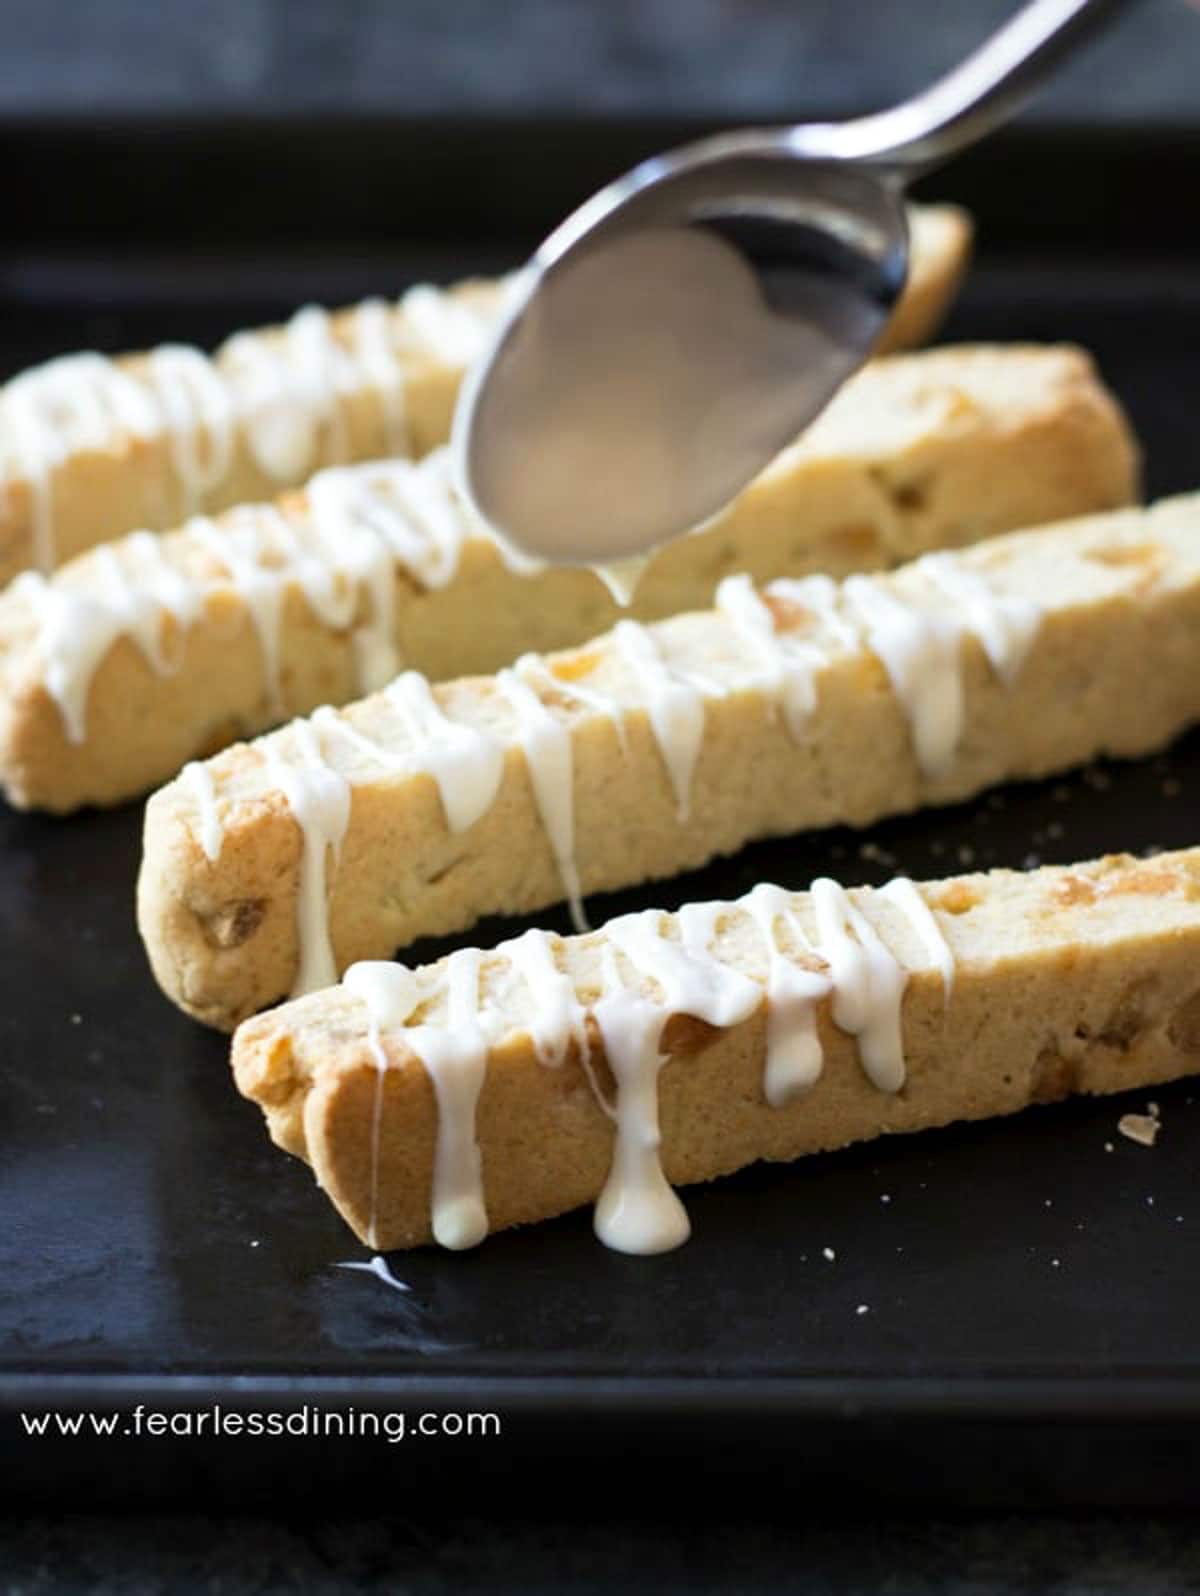 drizzling white chocolate over the biscotti